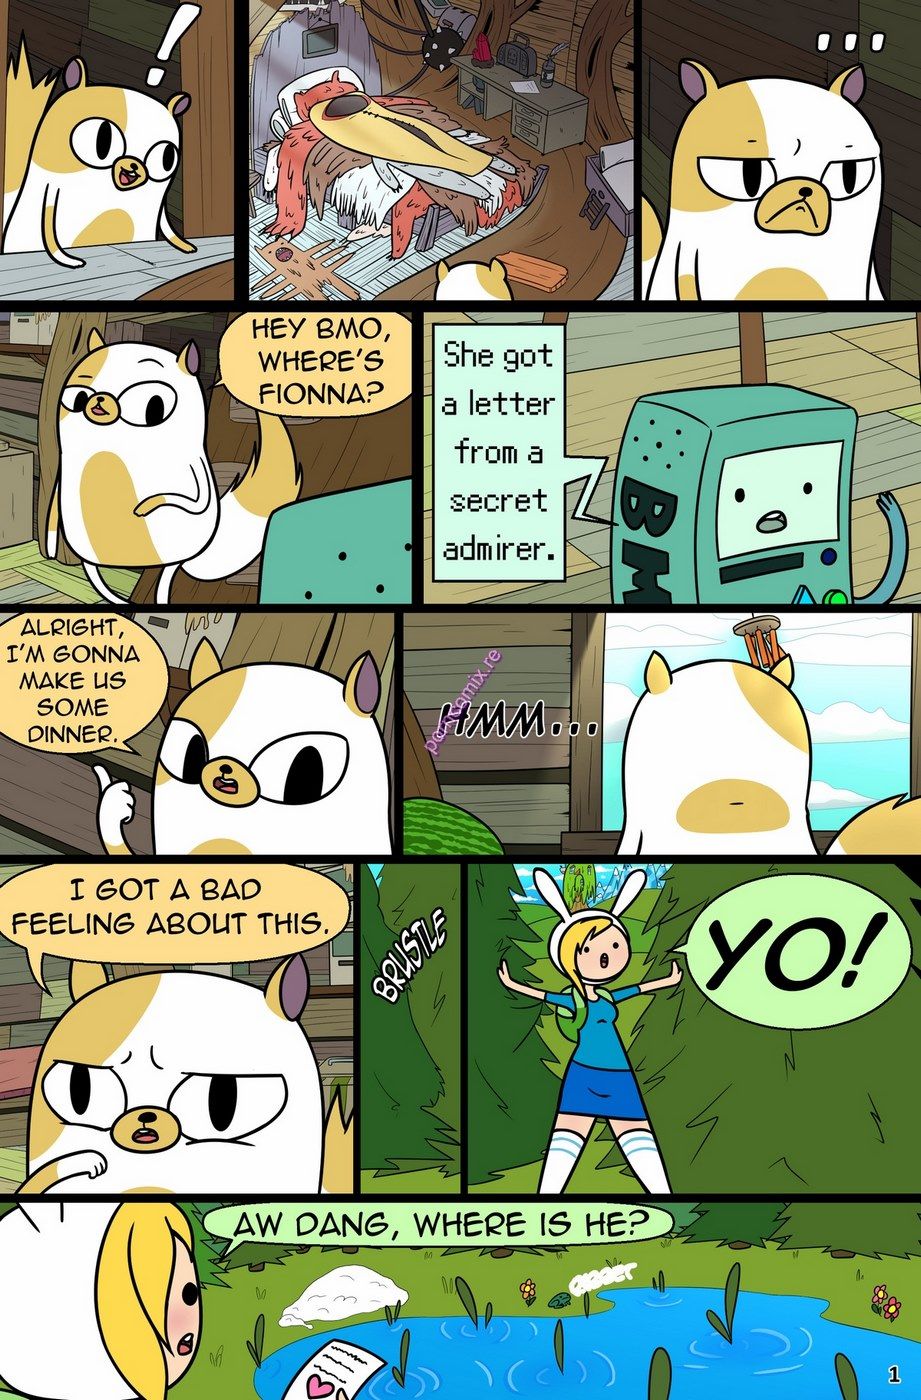 [cubbychambers]_MisAdventure_Time_Spring_Special comix_59783.jpg